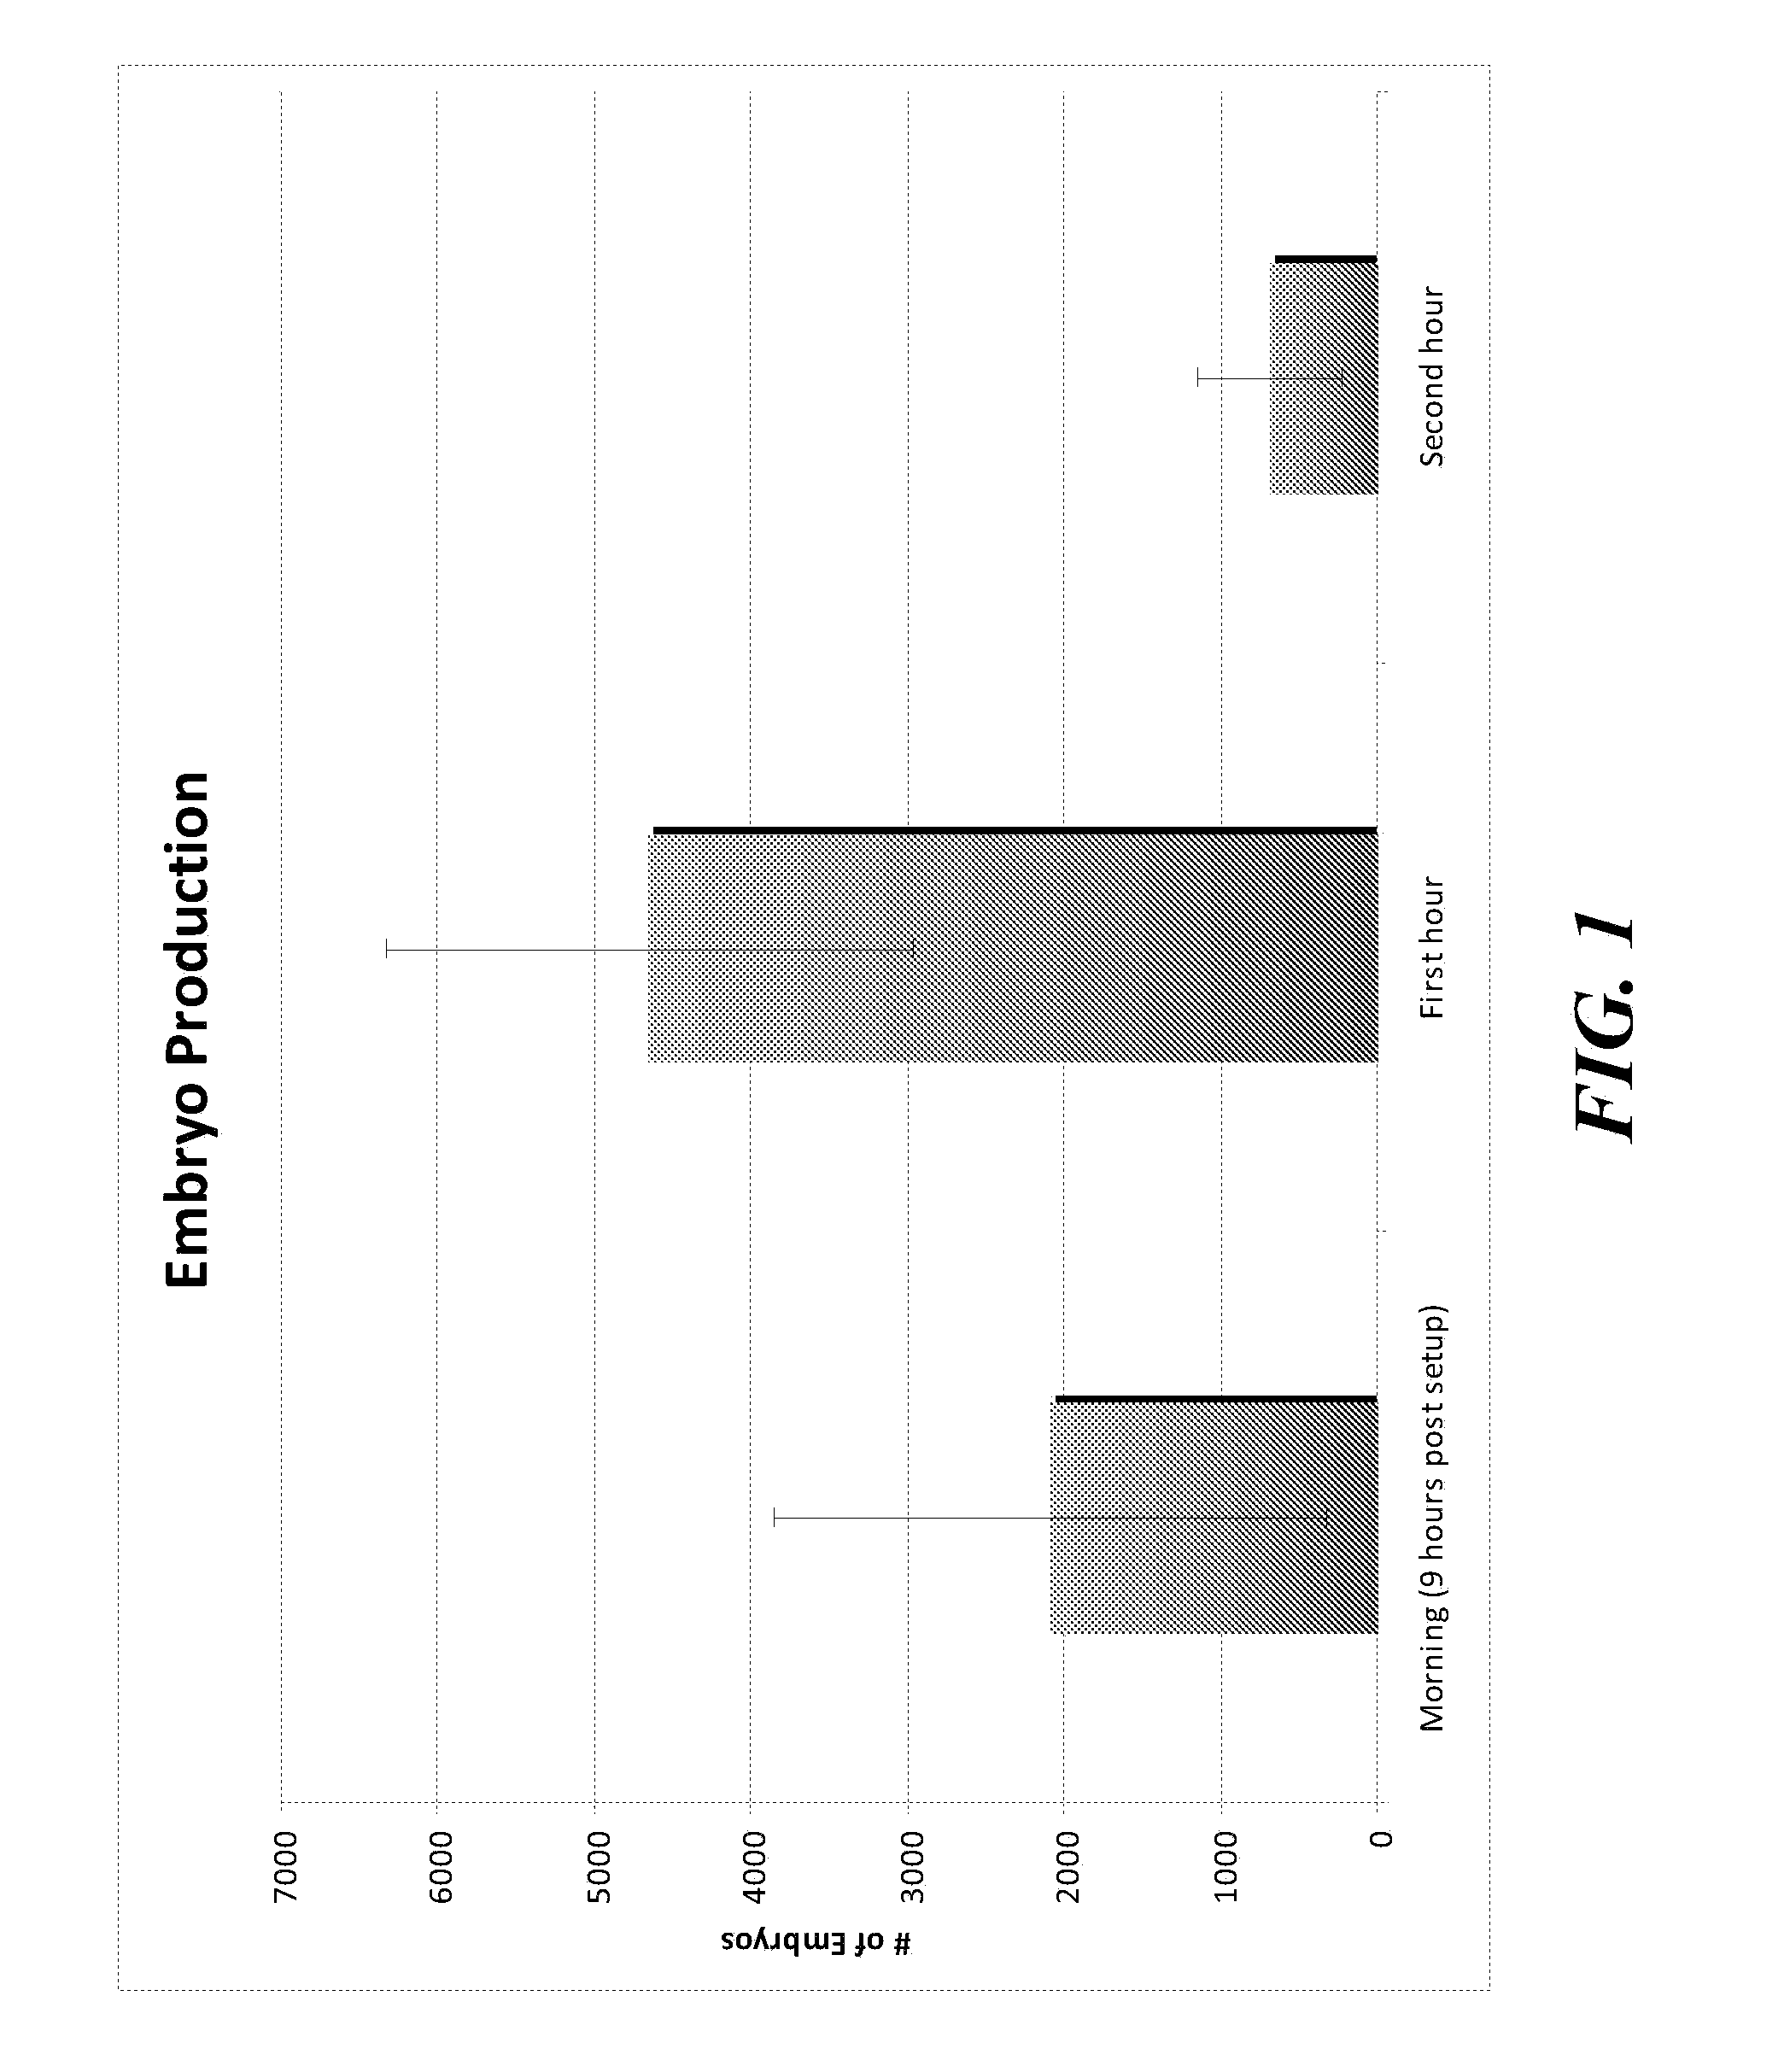 Method and System for Mass Production of Fish Embryos